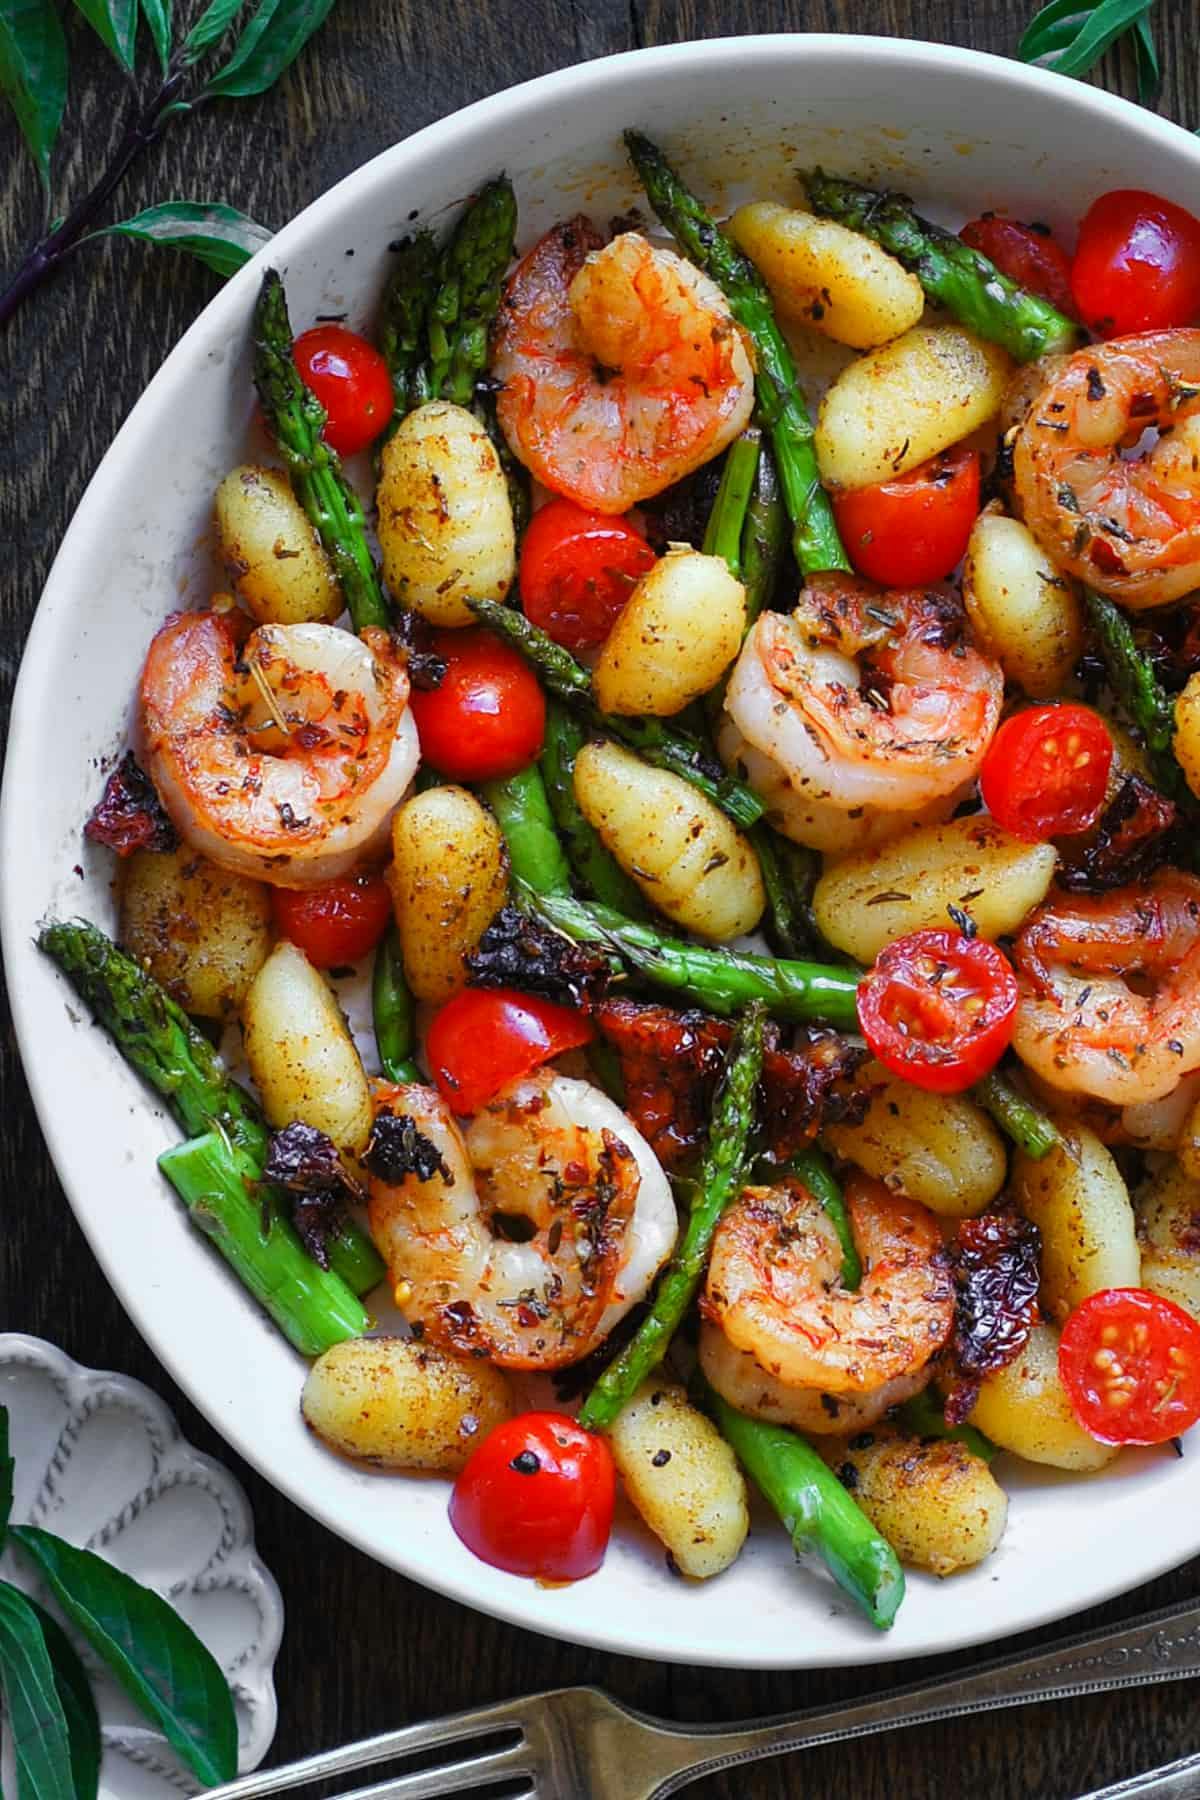 Shrimp and Crispy Gnocchi with Asparagus, Cherry Tomatoes, and Sun-Dried Tomatoes